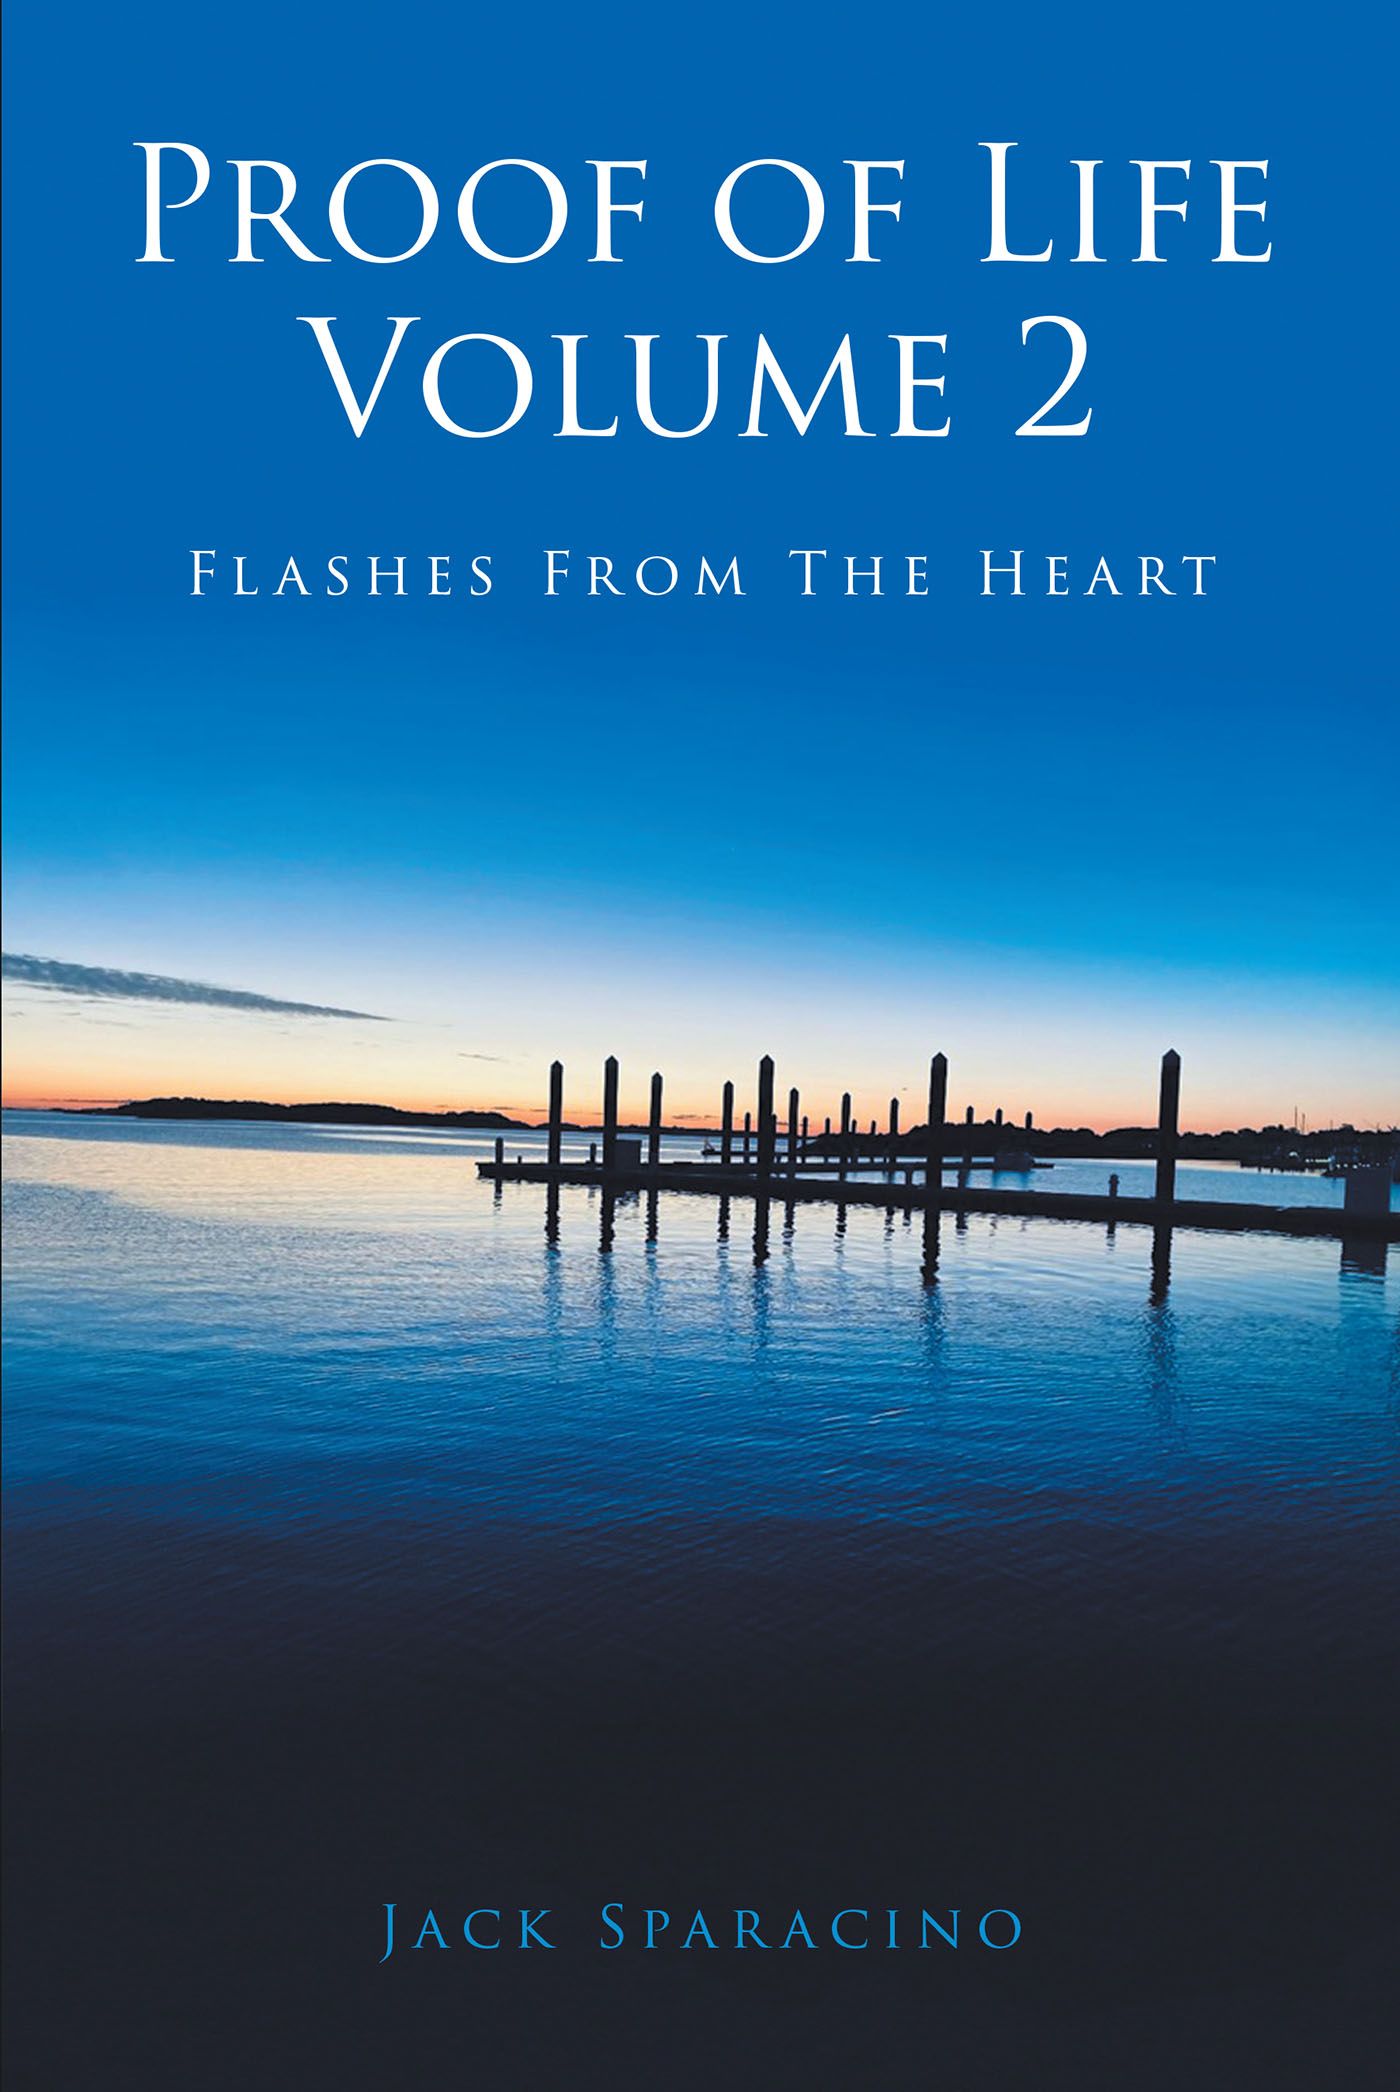 Jack Sparacino’s New Book, "Proof of Life Volume 2: Flashes from the Heart," Explores the Meaning of Truly Living Life Through Heartfelt Essays and Poetry